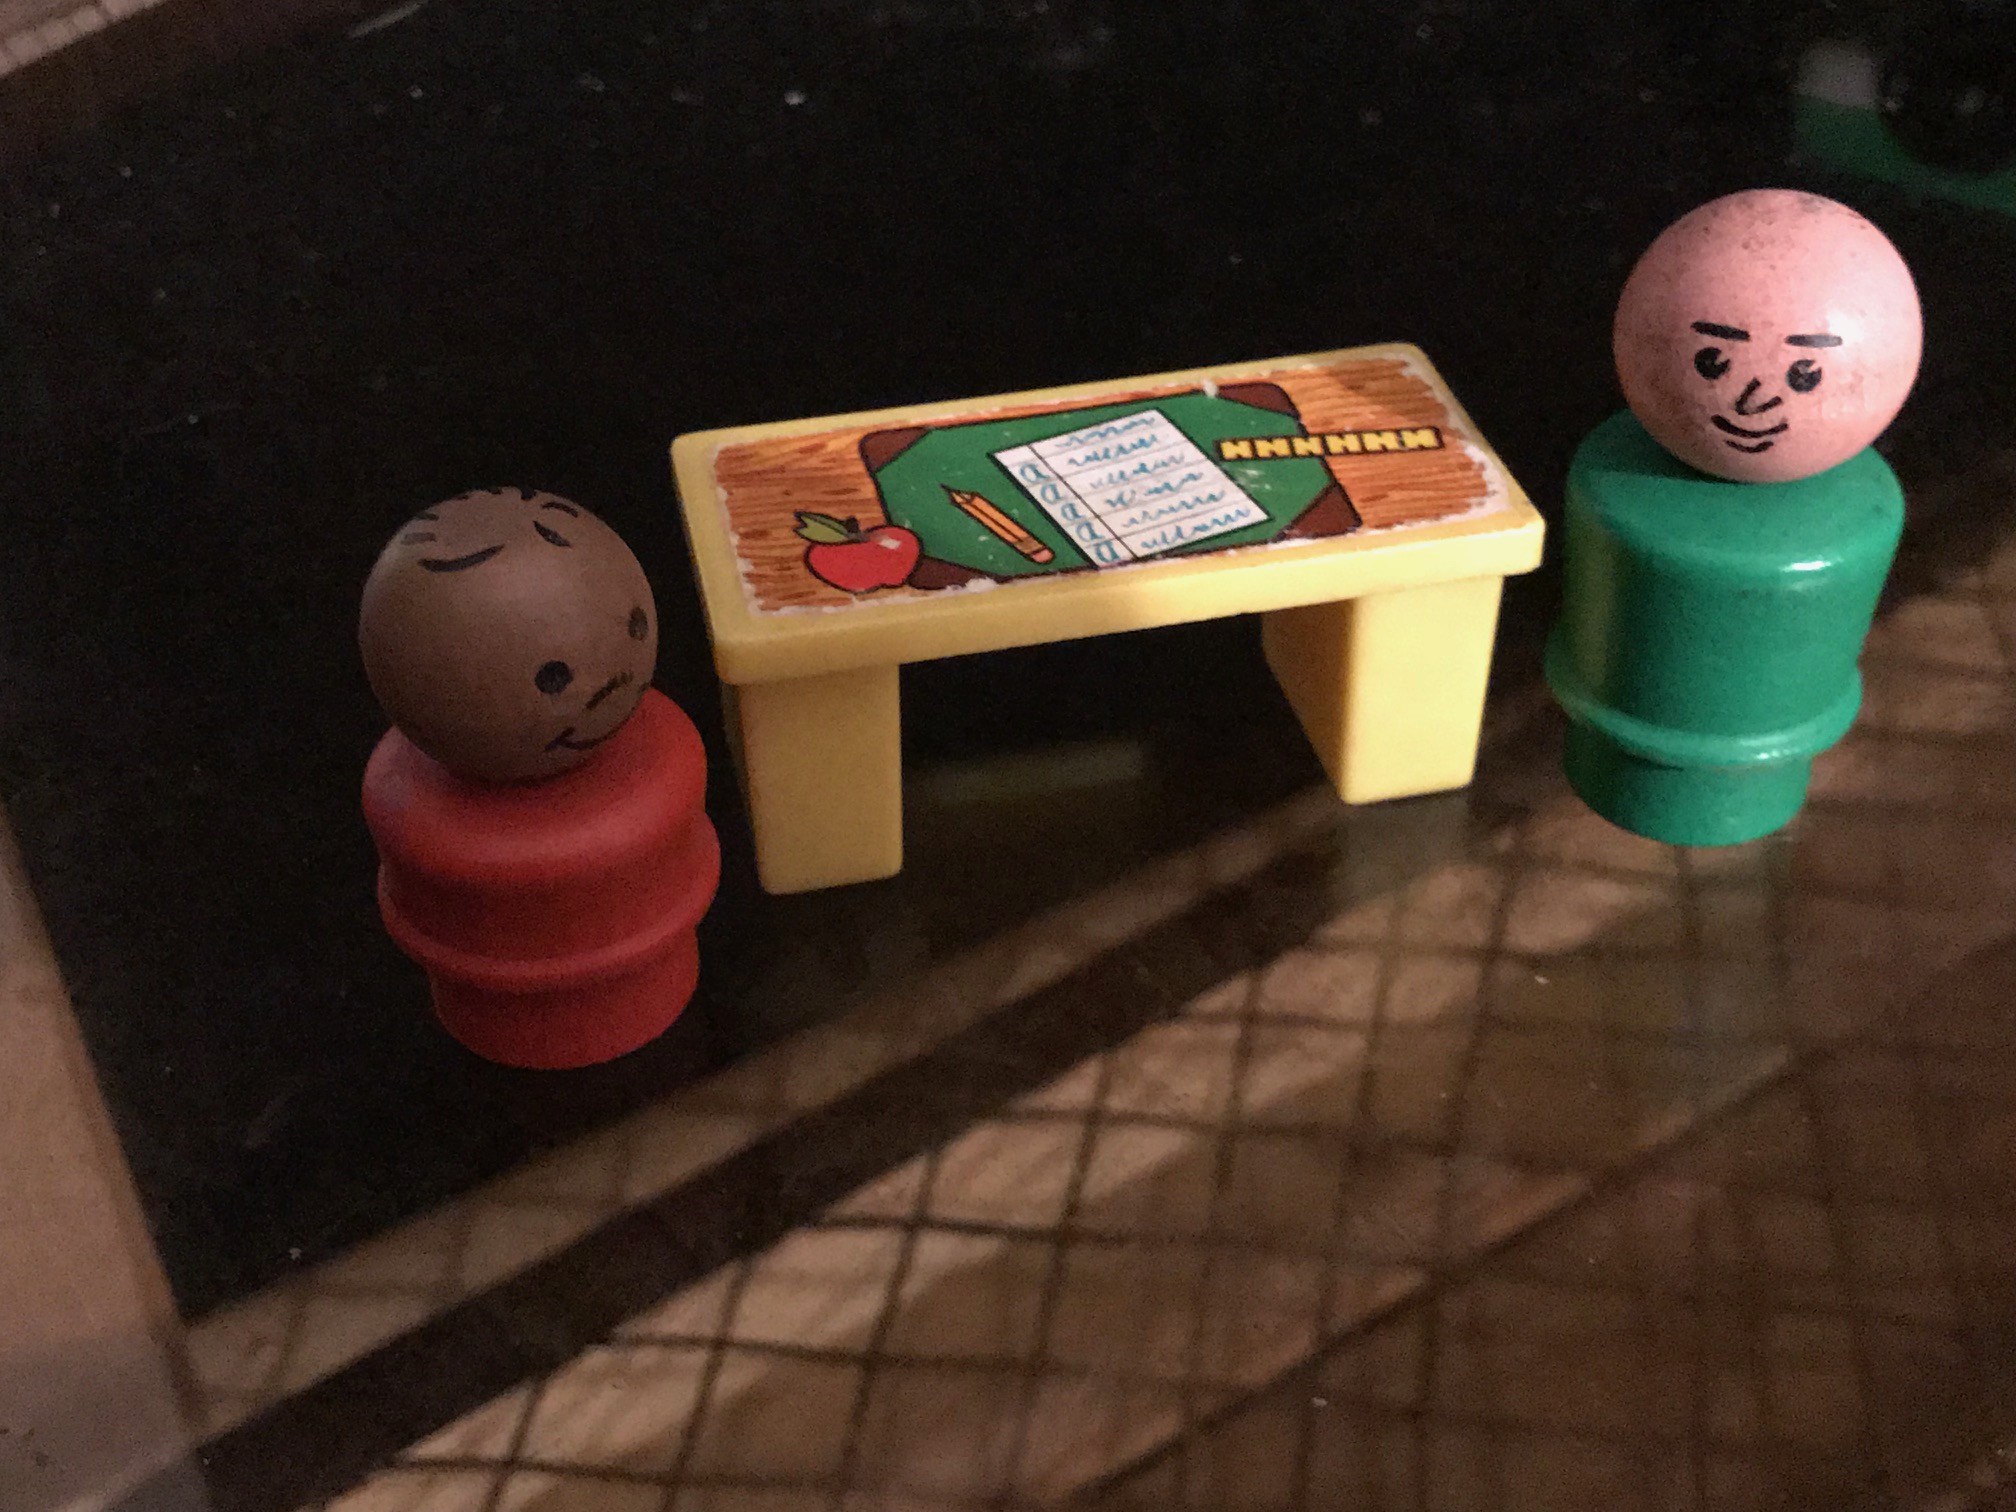 Details about   Fisher Price Little People Vintage Green Teacher Desk & Chair Lot 